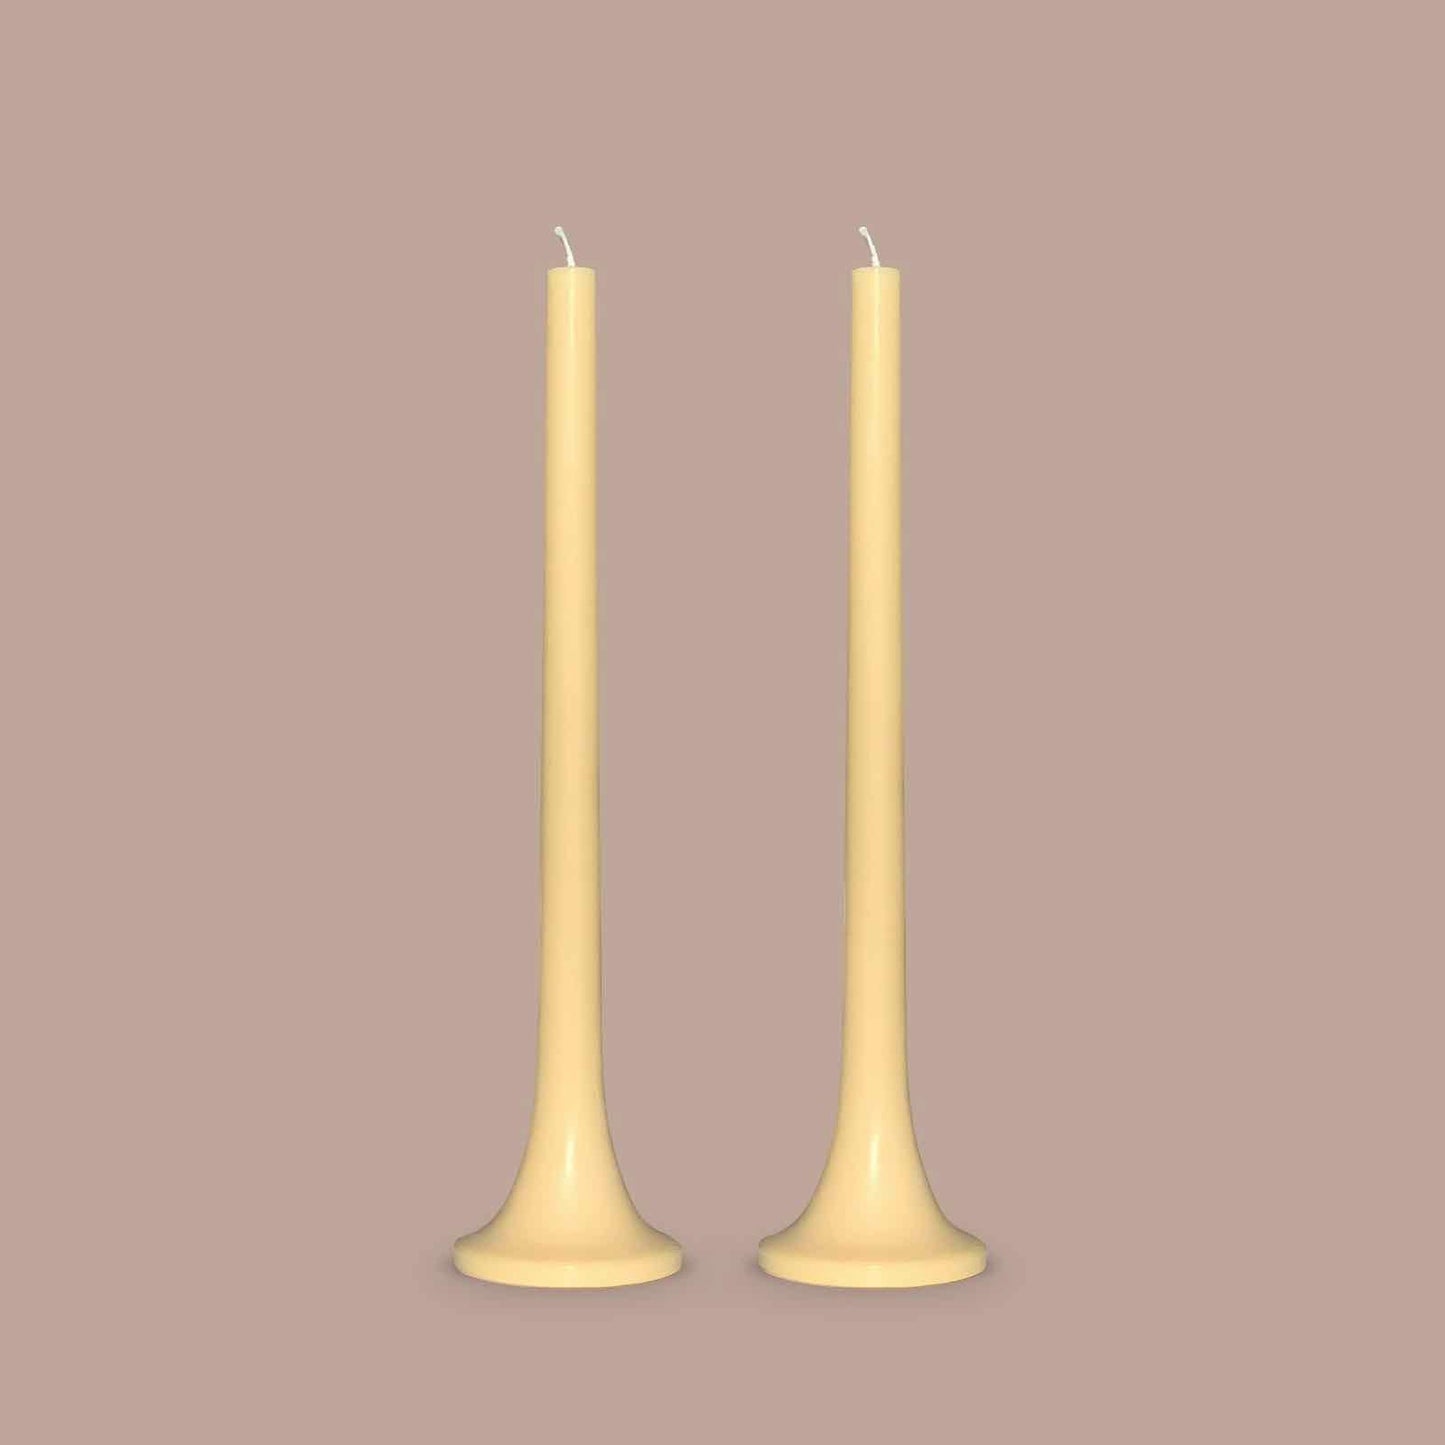 Pale yellow dinner candles